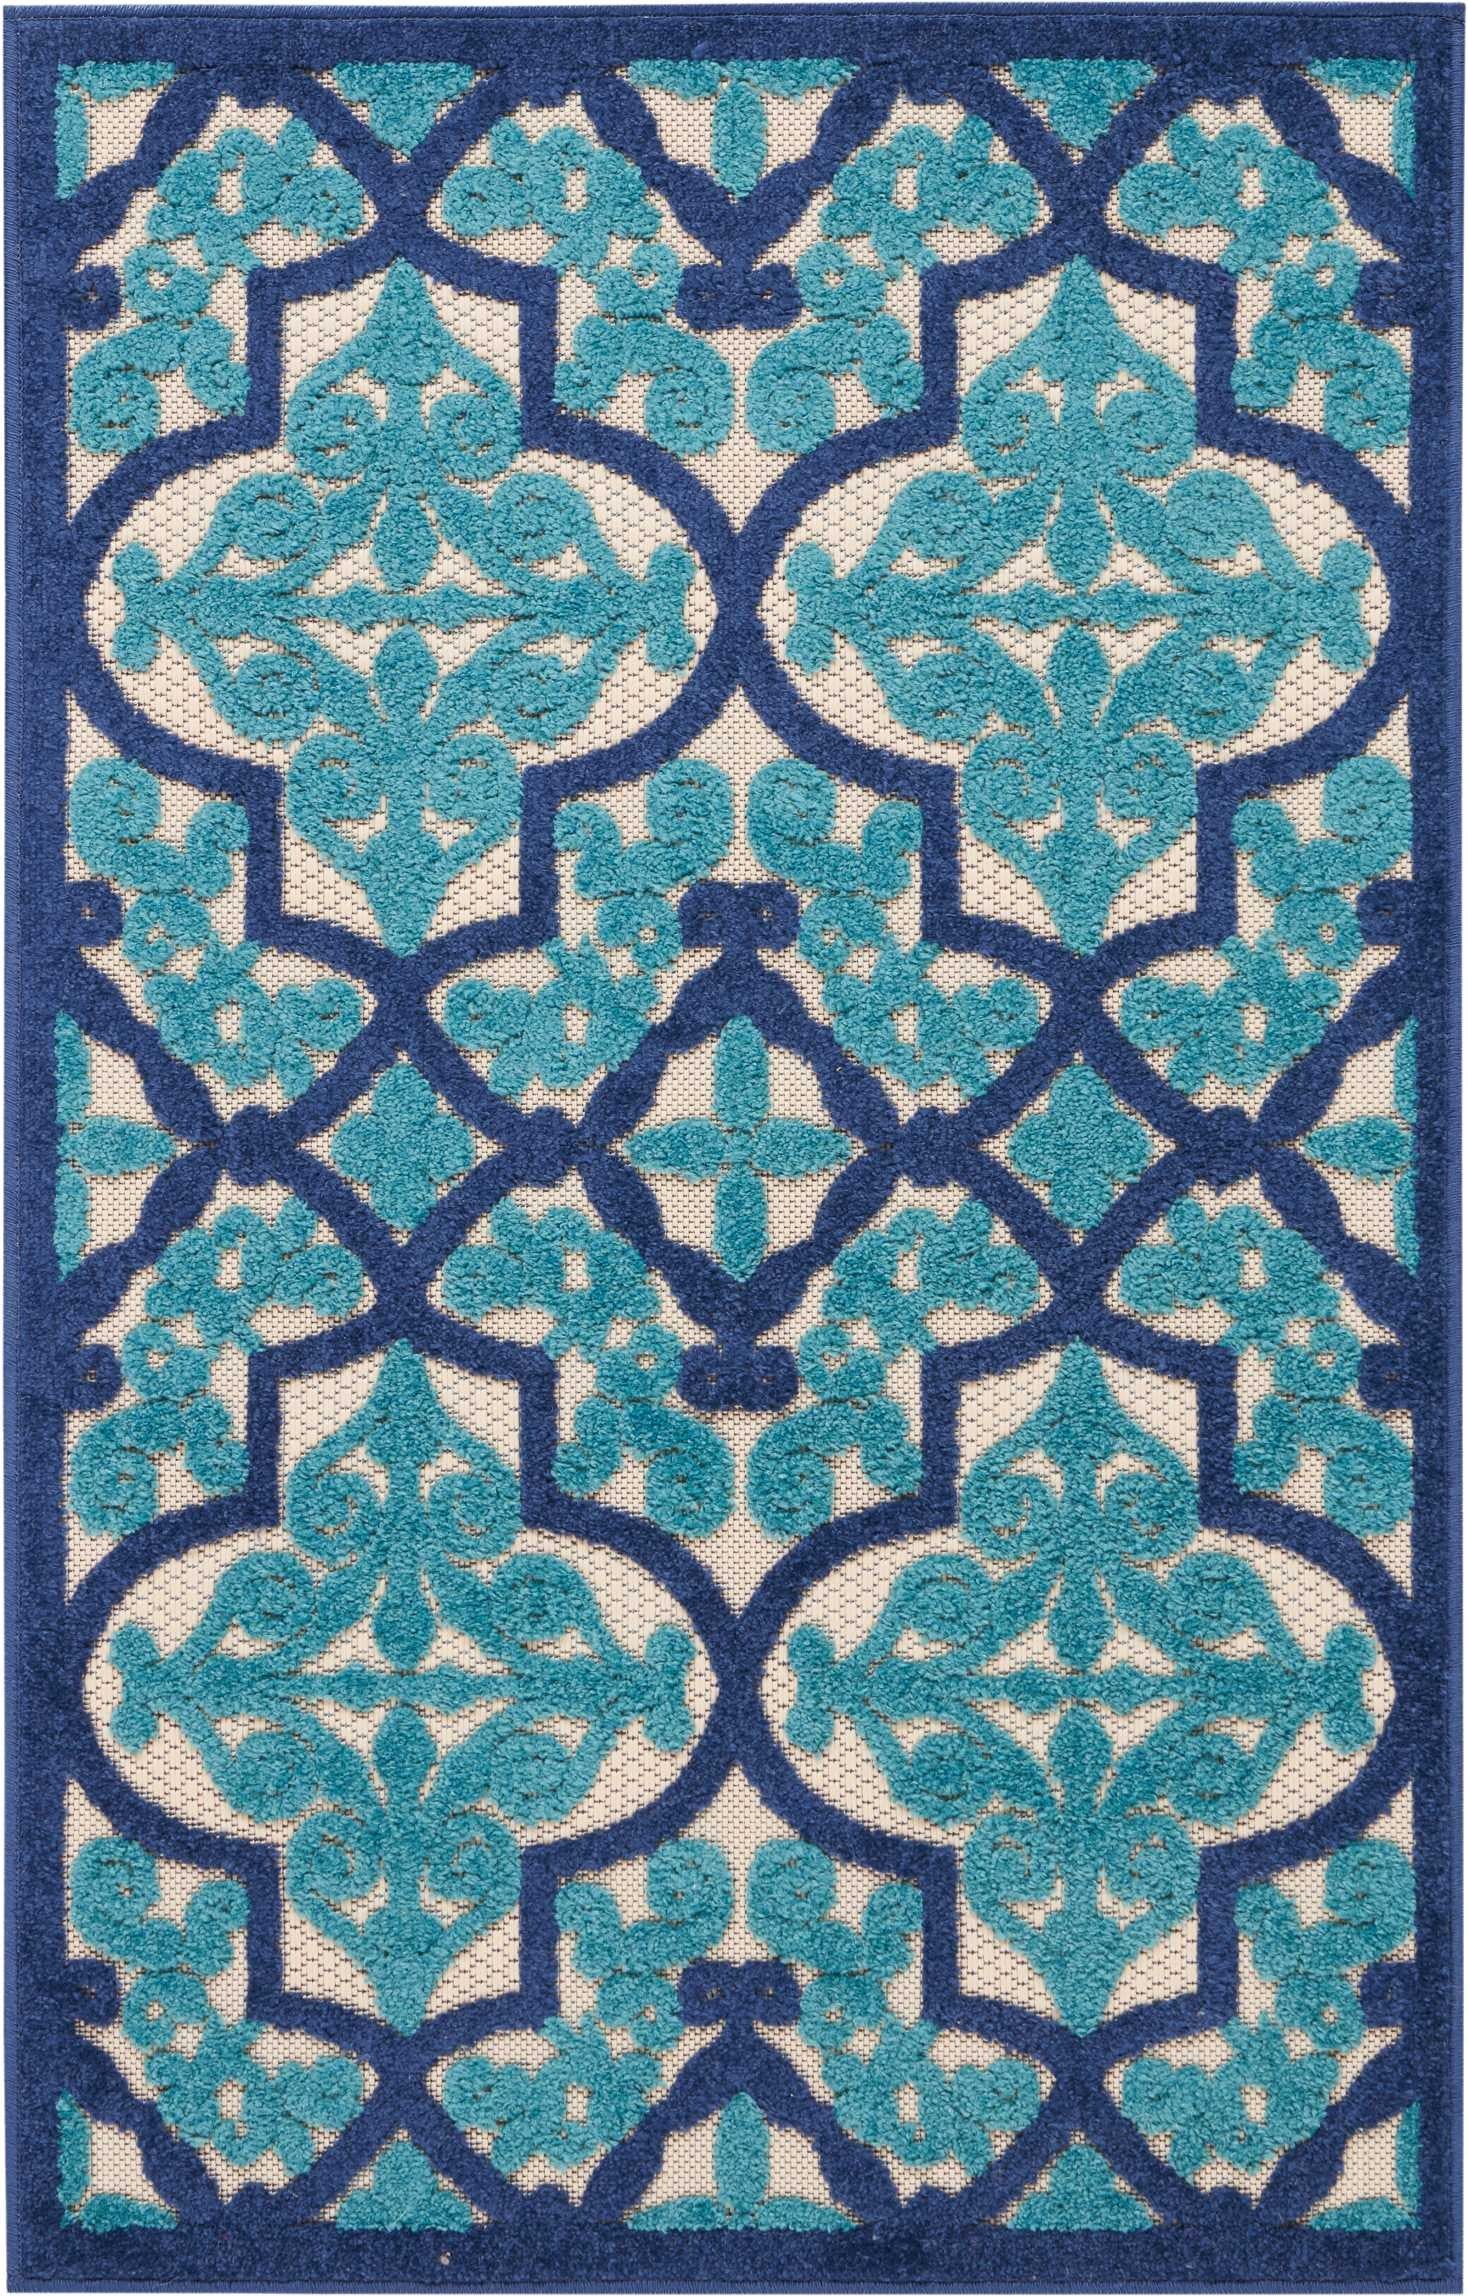 4' X 6' Blue And Ivory Moroccan Indoor Outdoor Area Rug